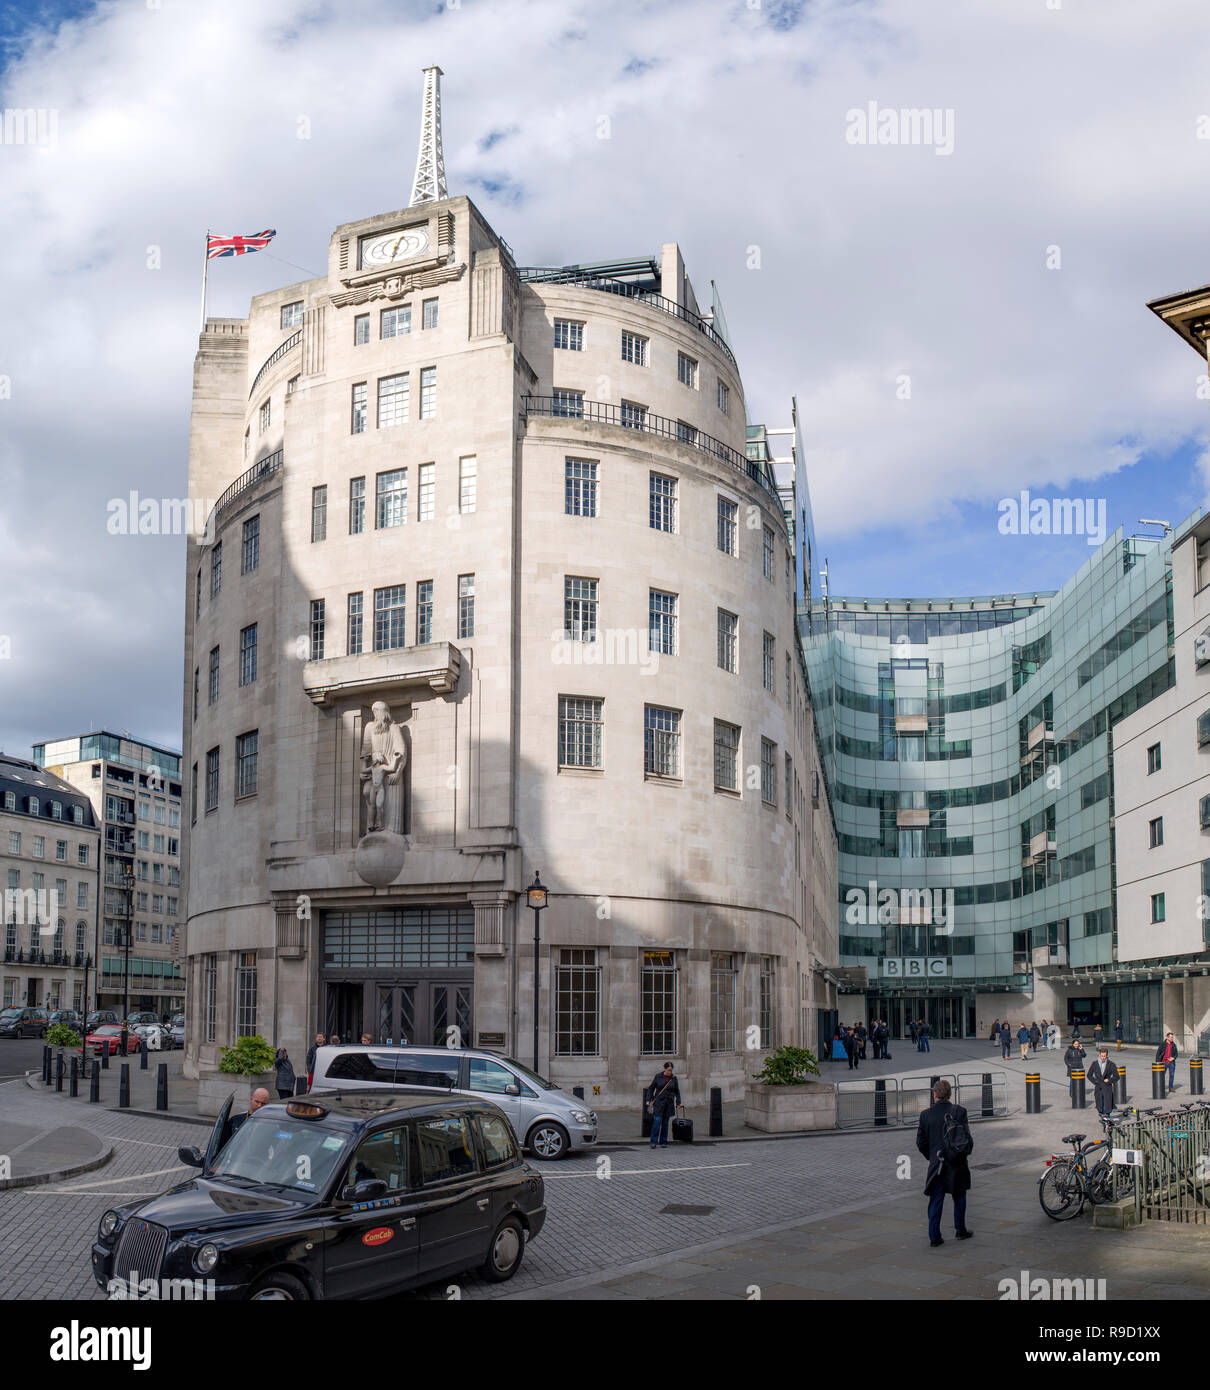 Exterior of BBC broadcasting House and the new Broadcasting House in central London, including stationary taxis and people crossing the courtyard. Stock Photo